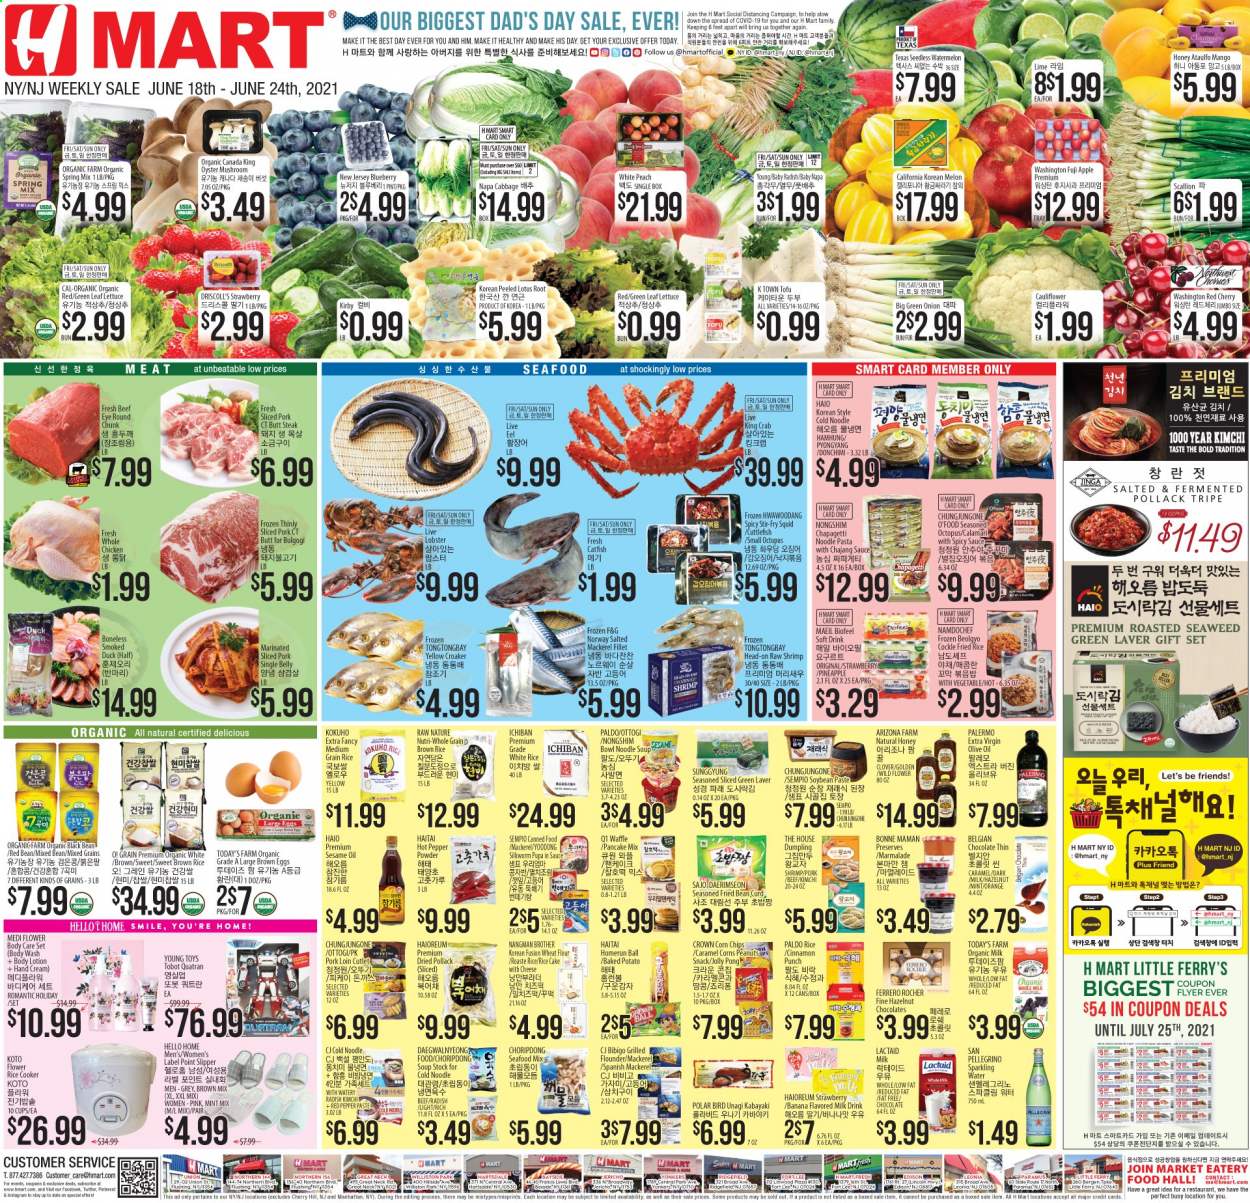 thumbnail - Hmart Flyer - 06/18/2021 - 06/24/2021 - Sales products - oyster mushrooms, mushrooms, cabbage, cauliflower, radishes, lettuce, green onion, mango, watermelon, pineapple, oranges, Fuji apple, calamari, catfish, cuttlefish, eel, flounder, lobster, mackerel, squid, king crab, pollock, octopus, oysters, seafood, crab, shrimps, smoked duck, soup, pasta, sauce, pancakes, dumplings, noodles cup, noodles, Lactaid, cheese, curd, tofu, Clover, organic milk, large eggs, chocolate, snack, Ferrero Rocher, corn chips, flour, wheat flour, seaweed, brown rice, white rice, medium grain rice, cinnamon, caramel, extra virgin olive oil, sesame oil, olive oil, oil, honey, soft drink, AriZona, sparkling water, San Pellegrino, punch, whole chicken, beef meat, steak, eye of round, pork loin, pork meat, body wash, body lotion, hand cream, gift set, Lotus, tray, rice cooker, cup, Brother, melons. Page 1.